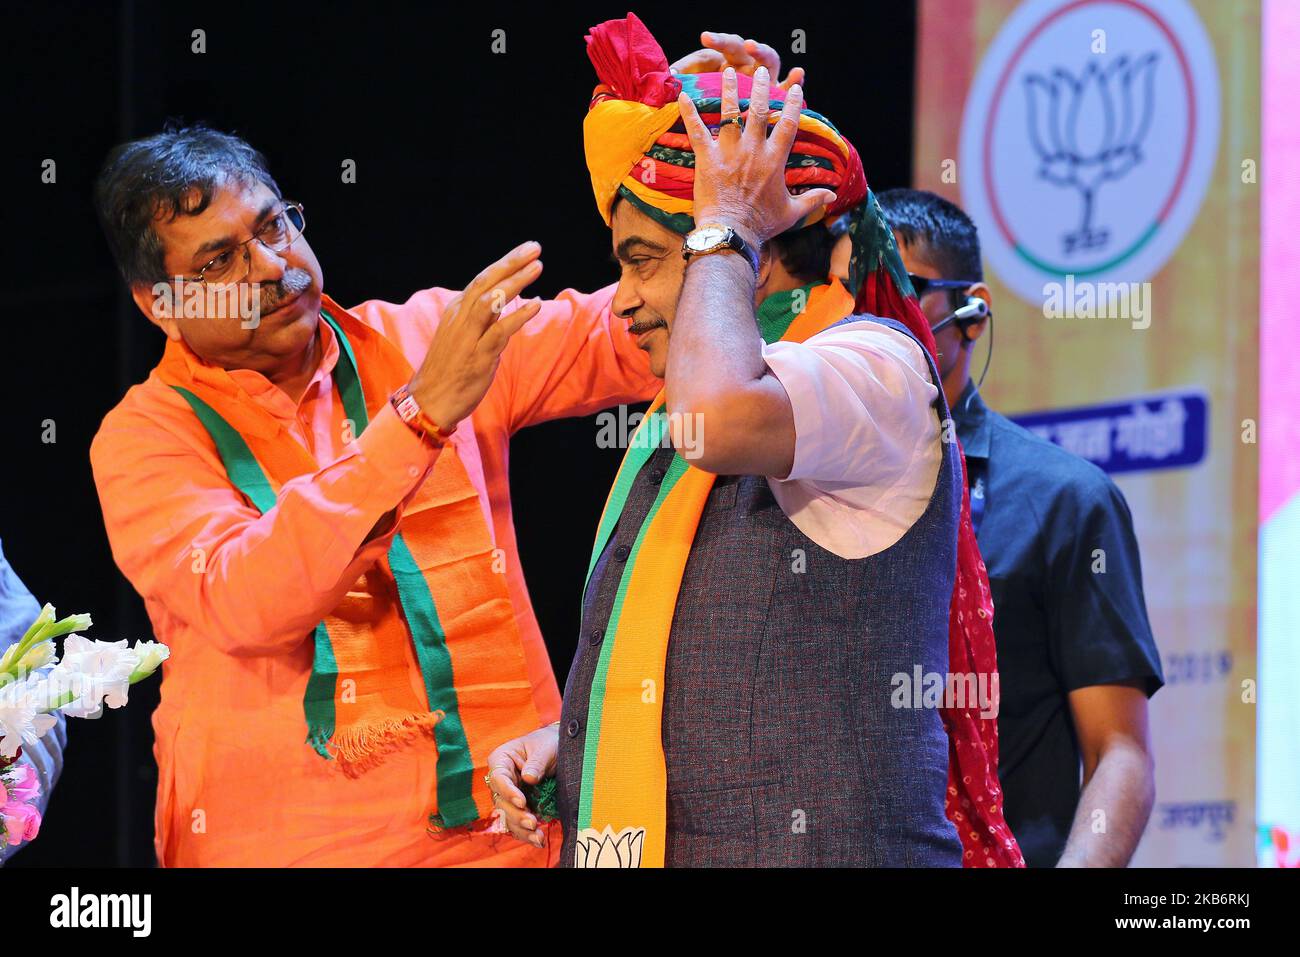 Union Minister of Transport Nitin Gadkari being welcomed by Rajasthan BJP Satish Poonia during the ' One Nation One Consitution' program at Birla Auditorium in Jaipur ,Rajasthan, India, Sept 23,2019.(Photo By Vishal Bhatnagar/NurPhoto) (Photo by Vishal Bhatnagar/NurPhoto) Stock Photo